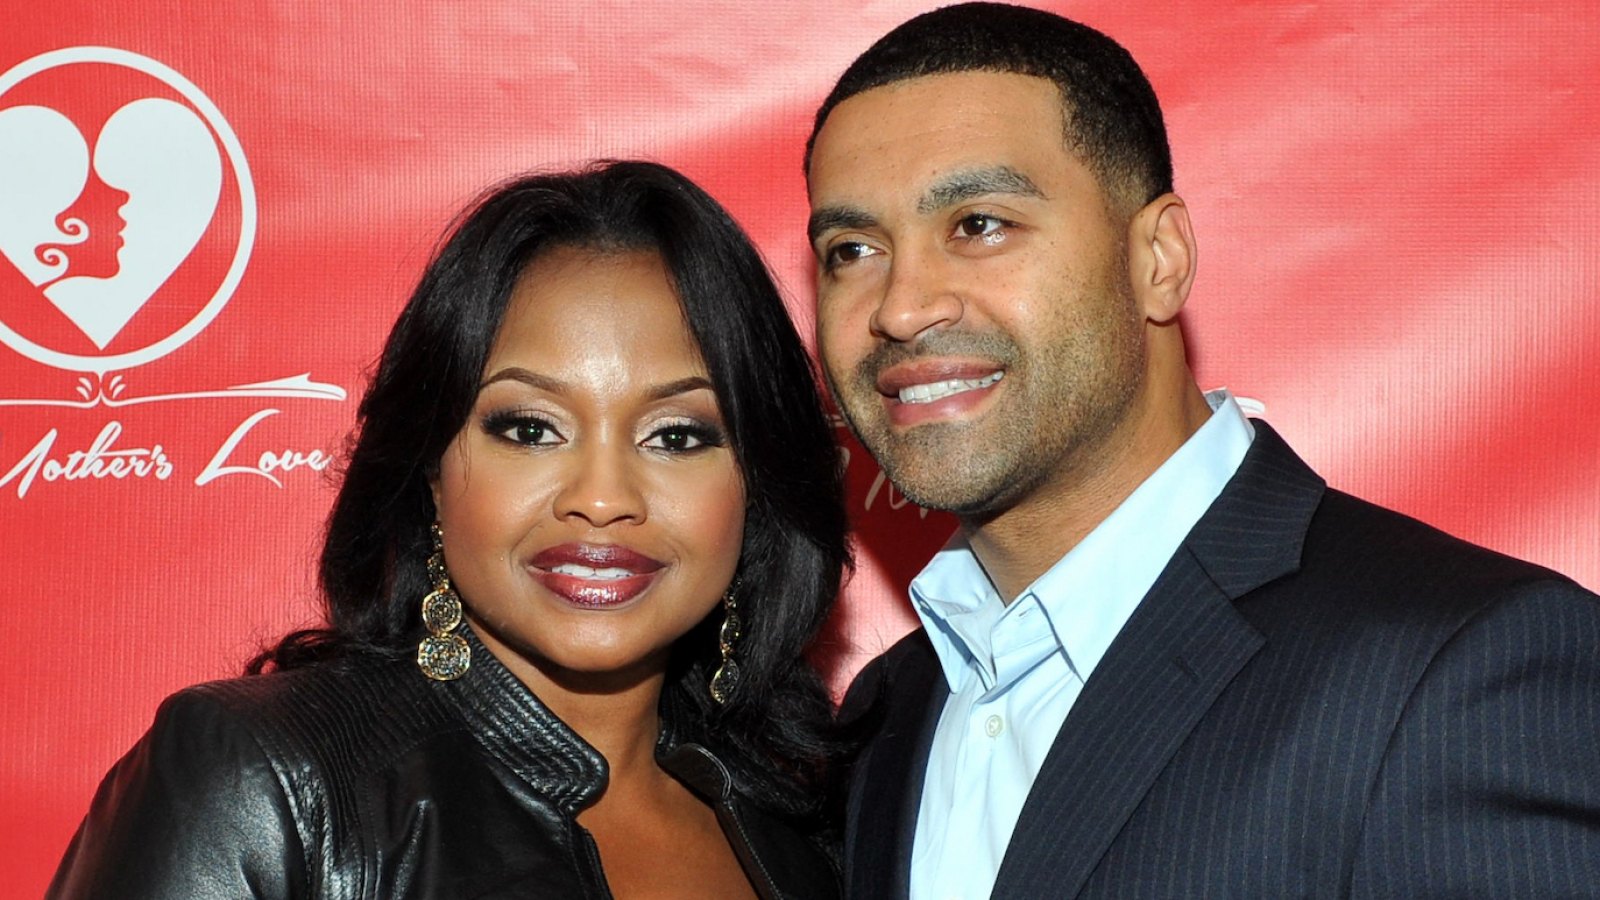 Phaedra Parks' Ex Apollo Nida Gets One Year Cut From Jail Sentence